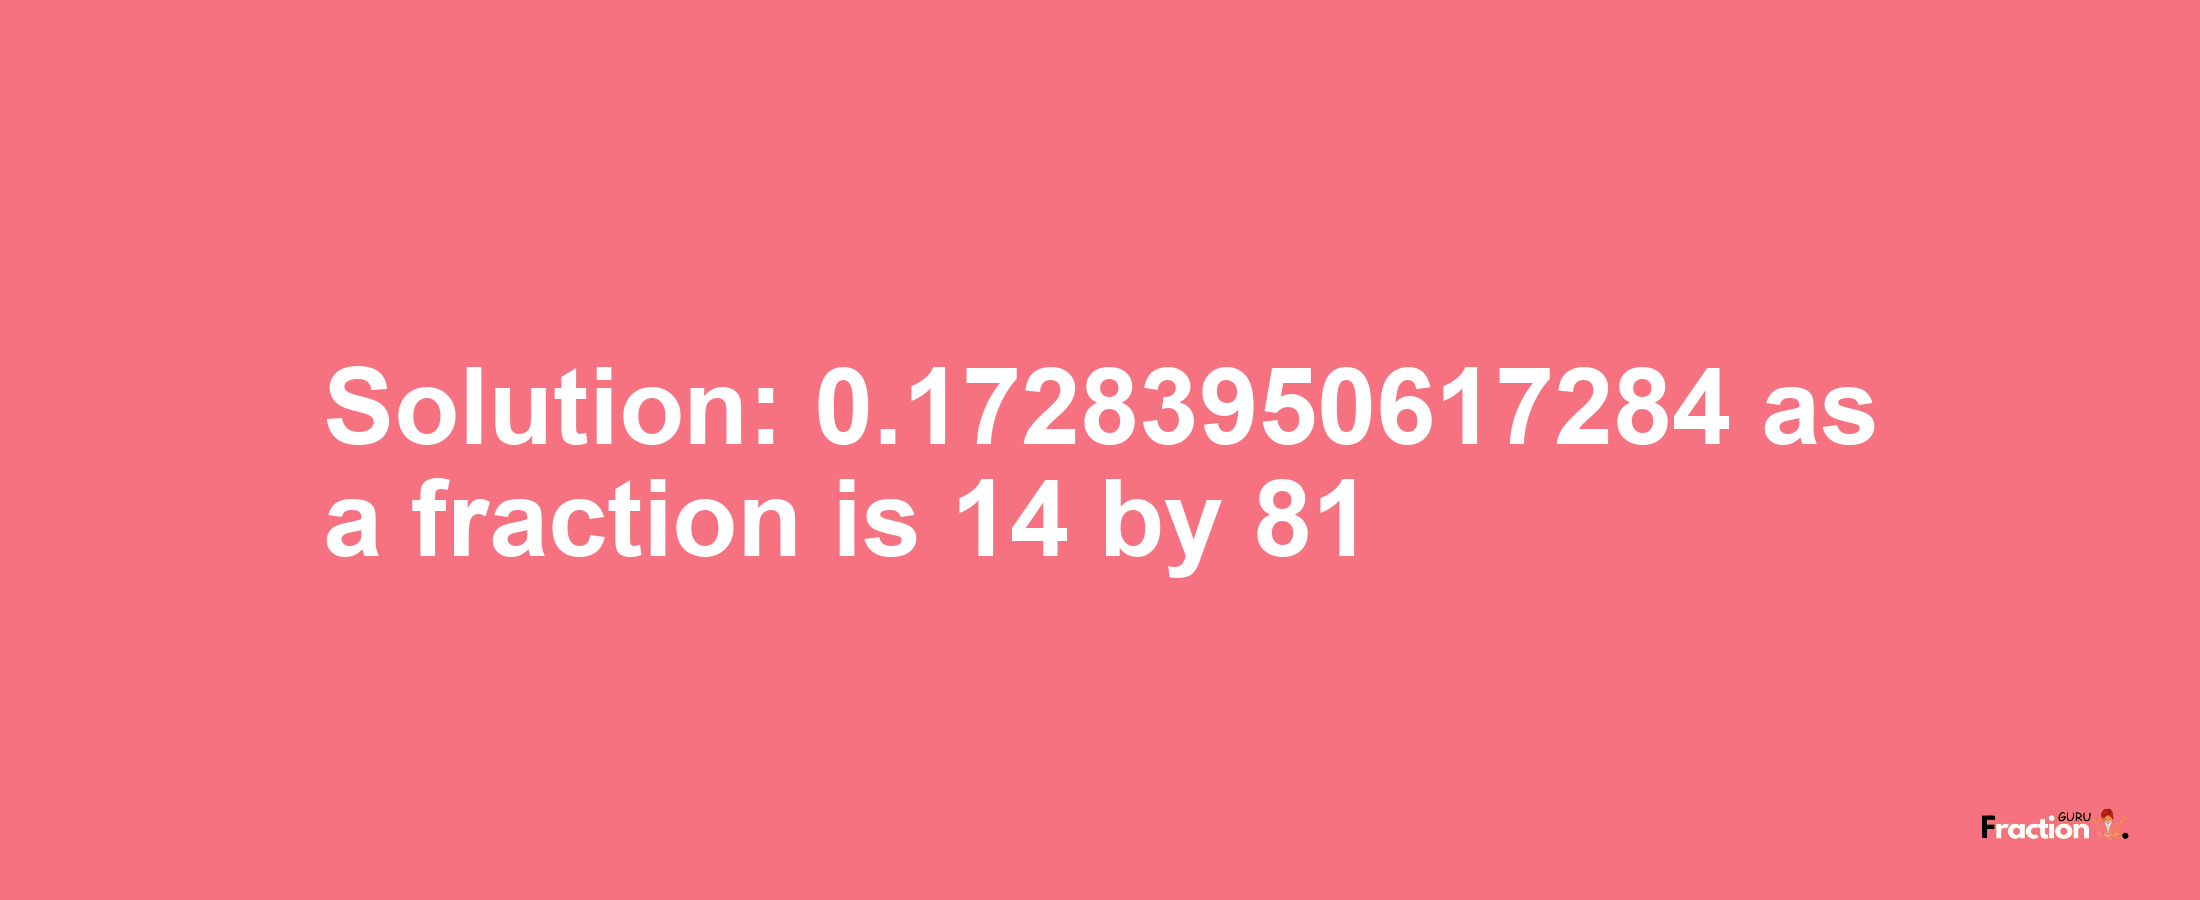 Solution:0.17283950617284 as a fraction is 14/81